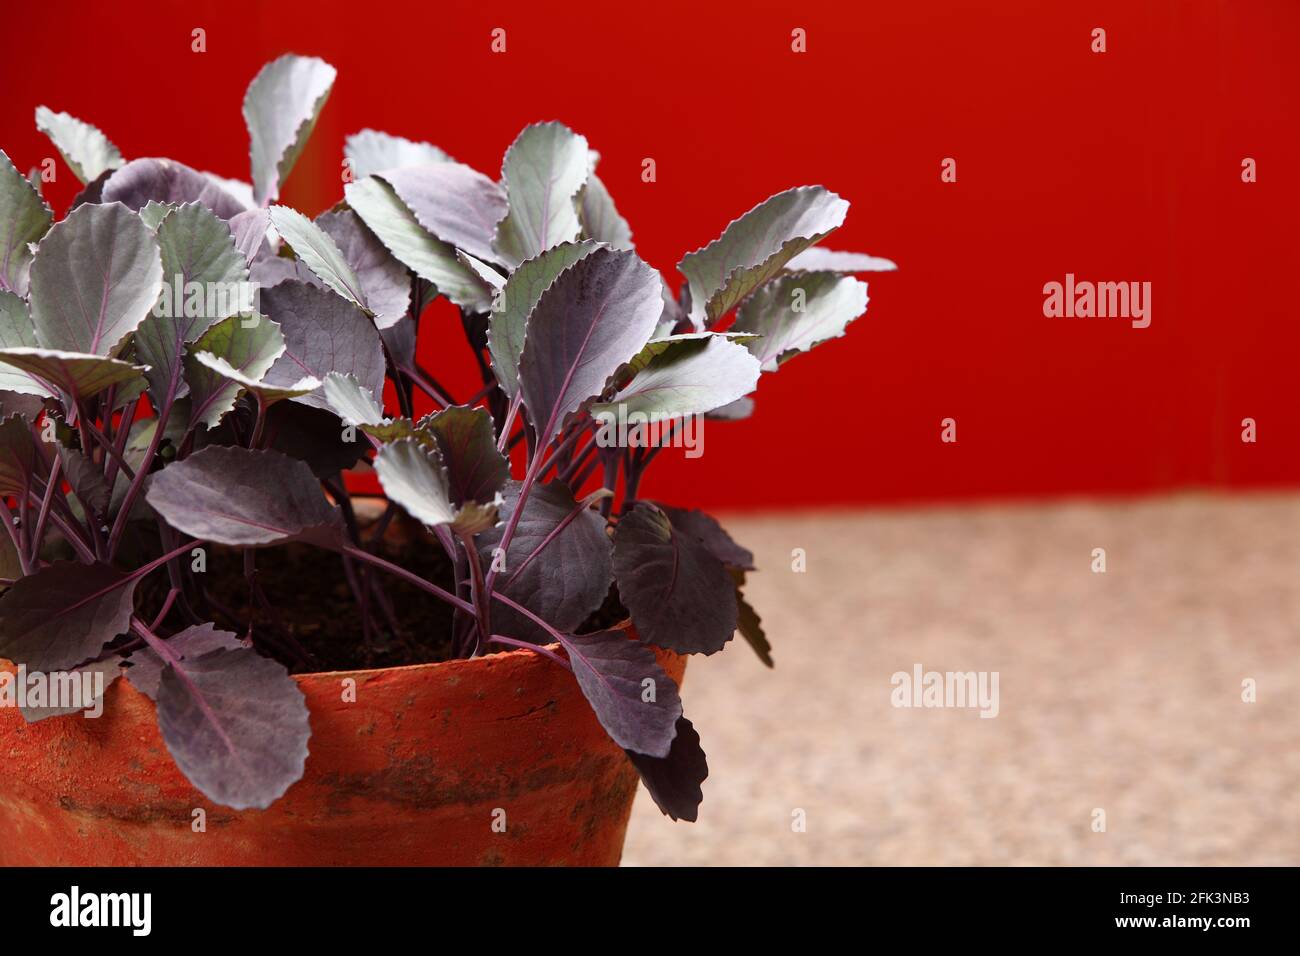 Seedlings of Red cabbage (Brassica oleracea var. capitata f. rubra) is a sort of cabbage, also known as purple cabbage, red kraut, or blue kraut in ki Stock Photo